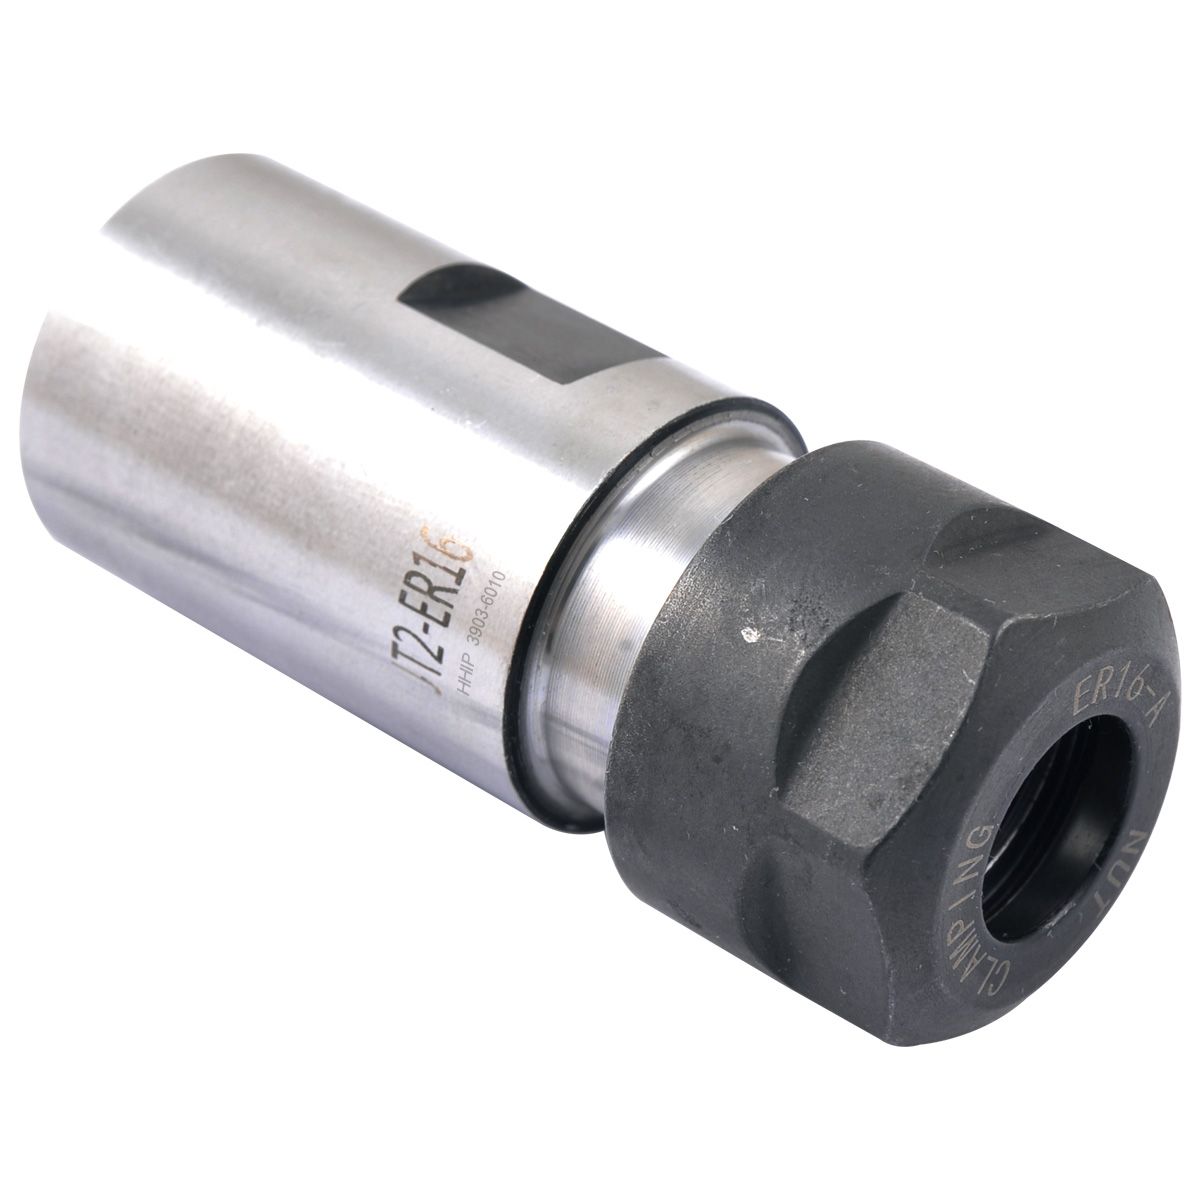 ER16 COLLET CHUCK WITH JT2 SLEEVE (3903-6010)